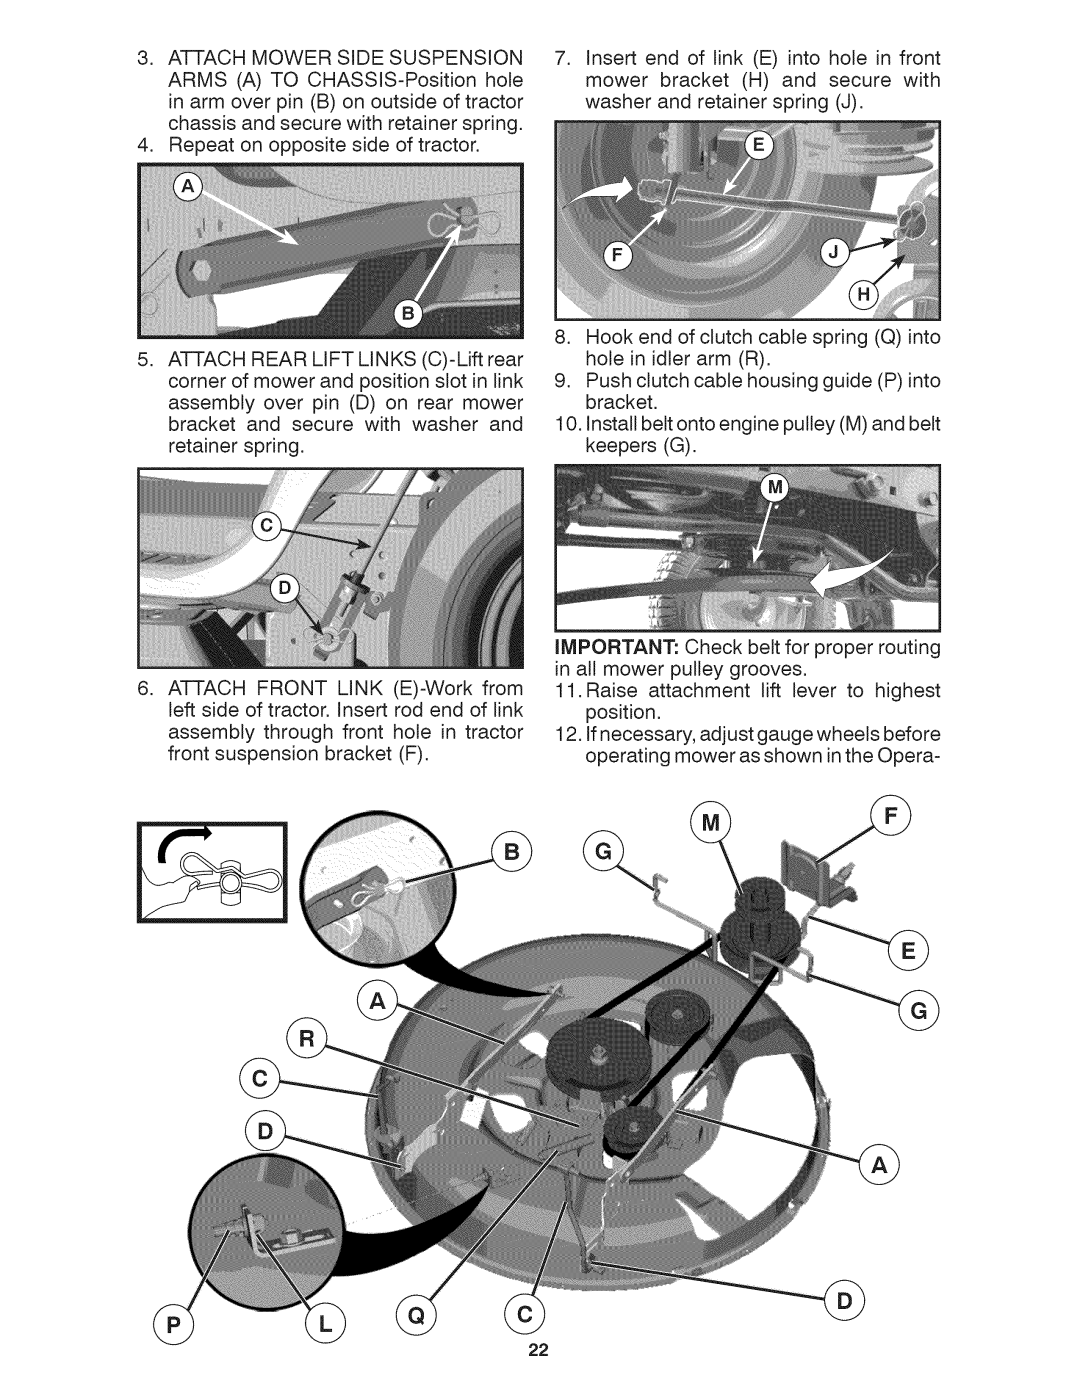 Craftsman 917.28035 owner manual Attach Mower Side Suspension, Repeat on opposite side of tractor 